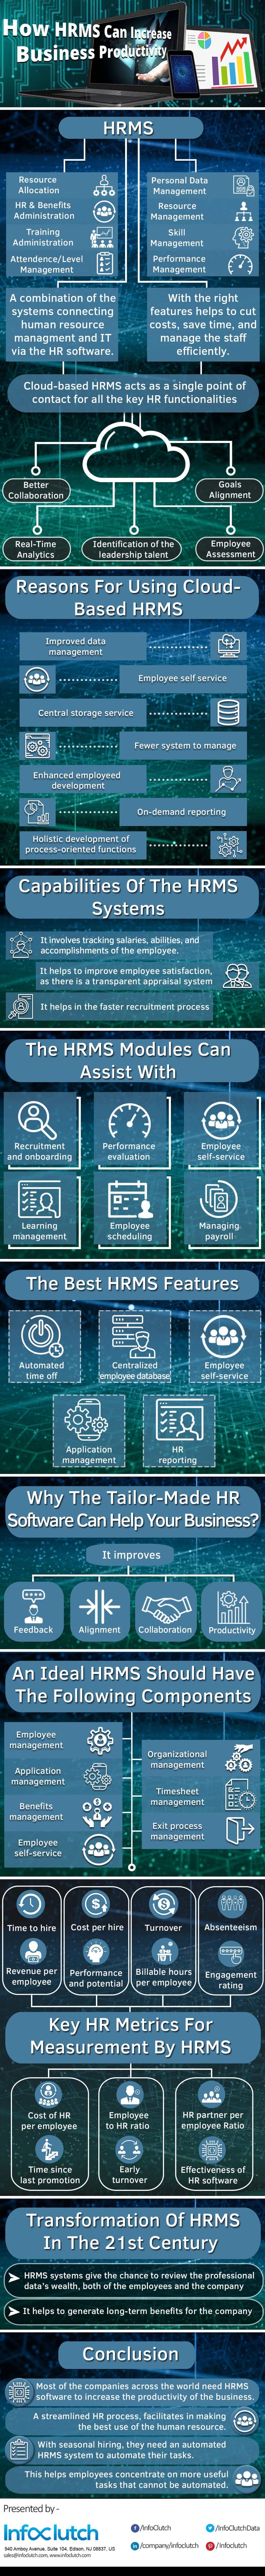 how hrms can increase business productivity